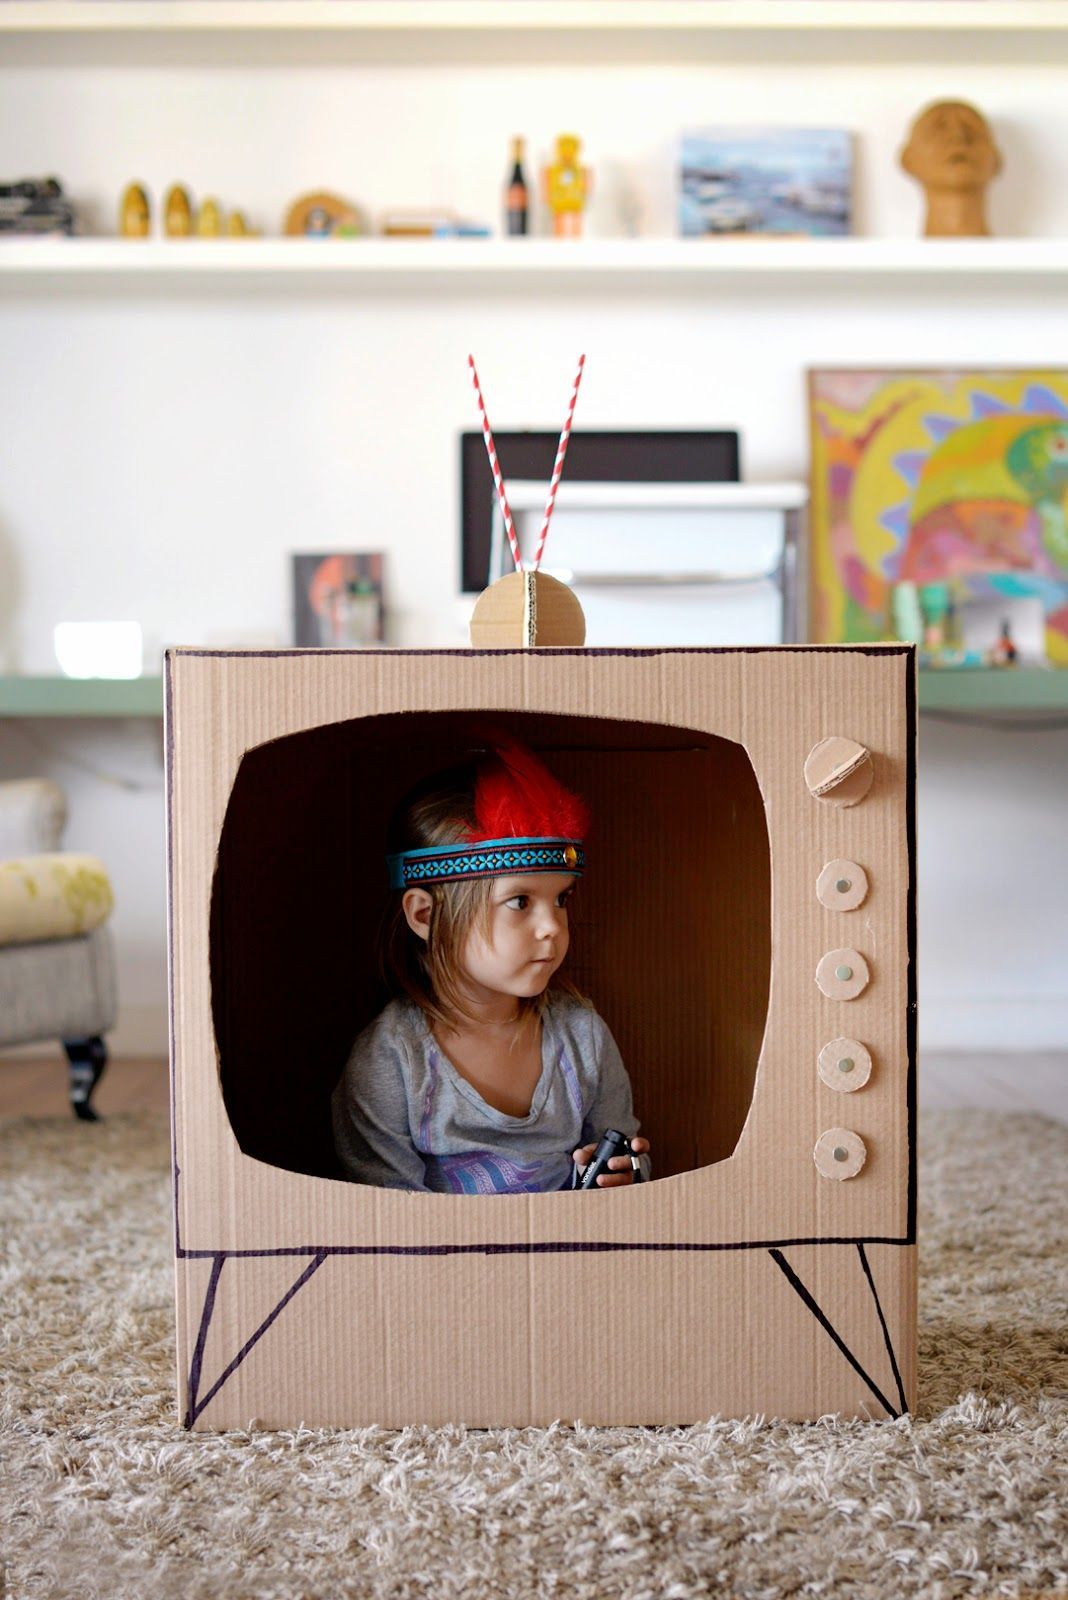 Recycle ypur box and let your child be on television! -   25 cardboard crafts kids
 ideas